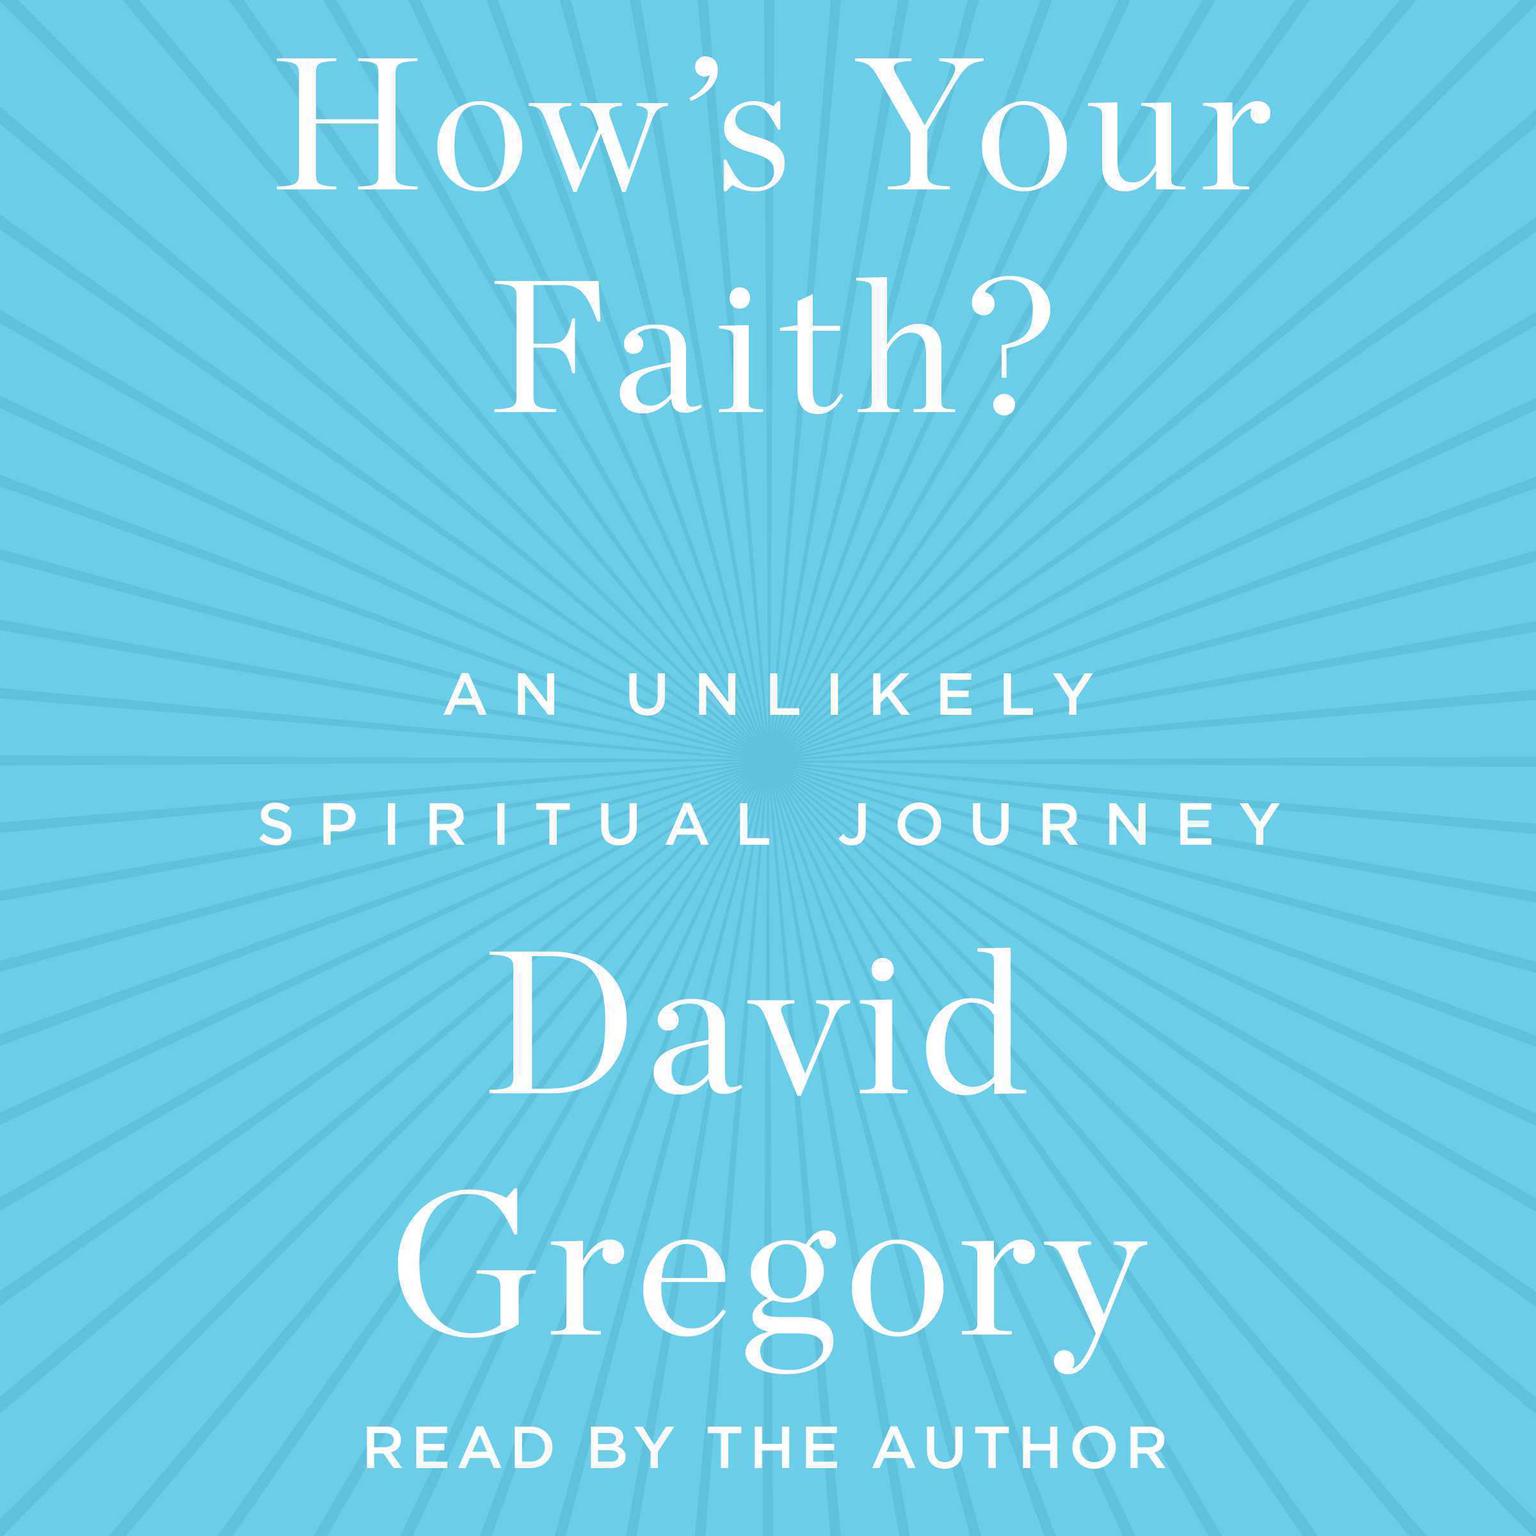 Hows Your Faith: An Unlikely Spiritual Journey Audiobook, by David Gregory